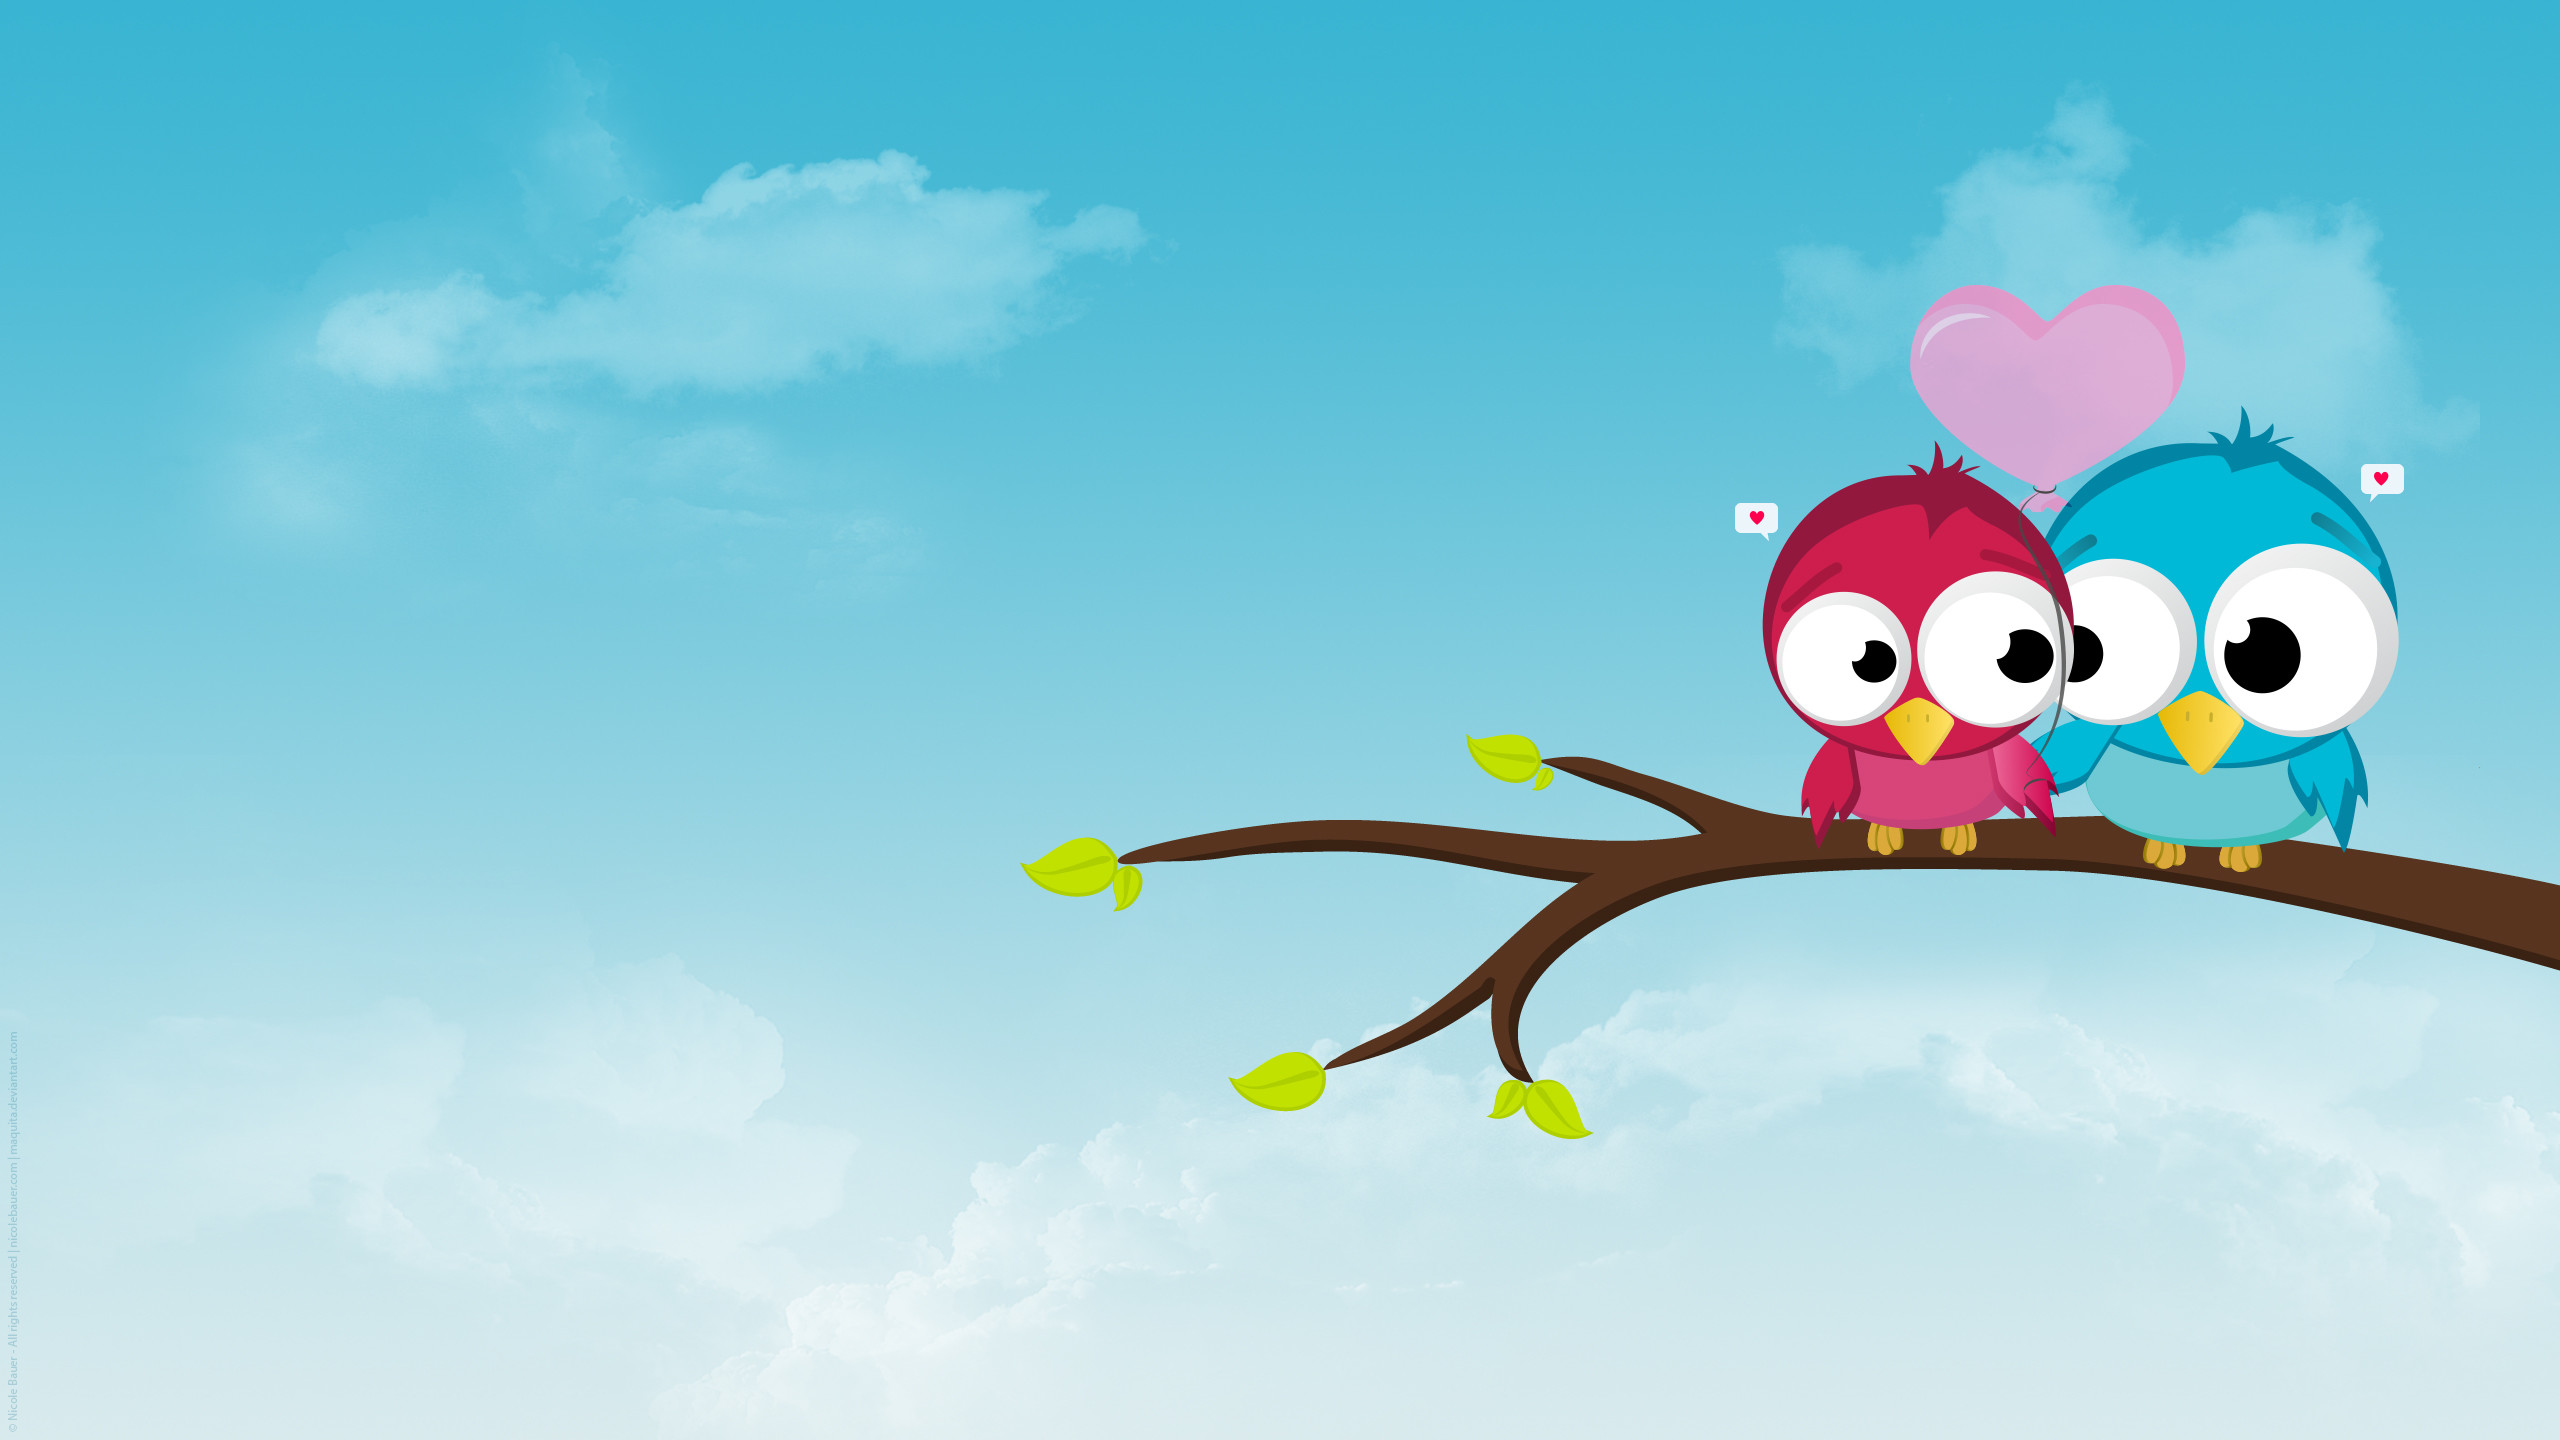 2560x1440 Cute Love Backgrounds - Wallpaper, High Definition, High Quality .